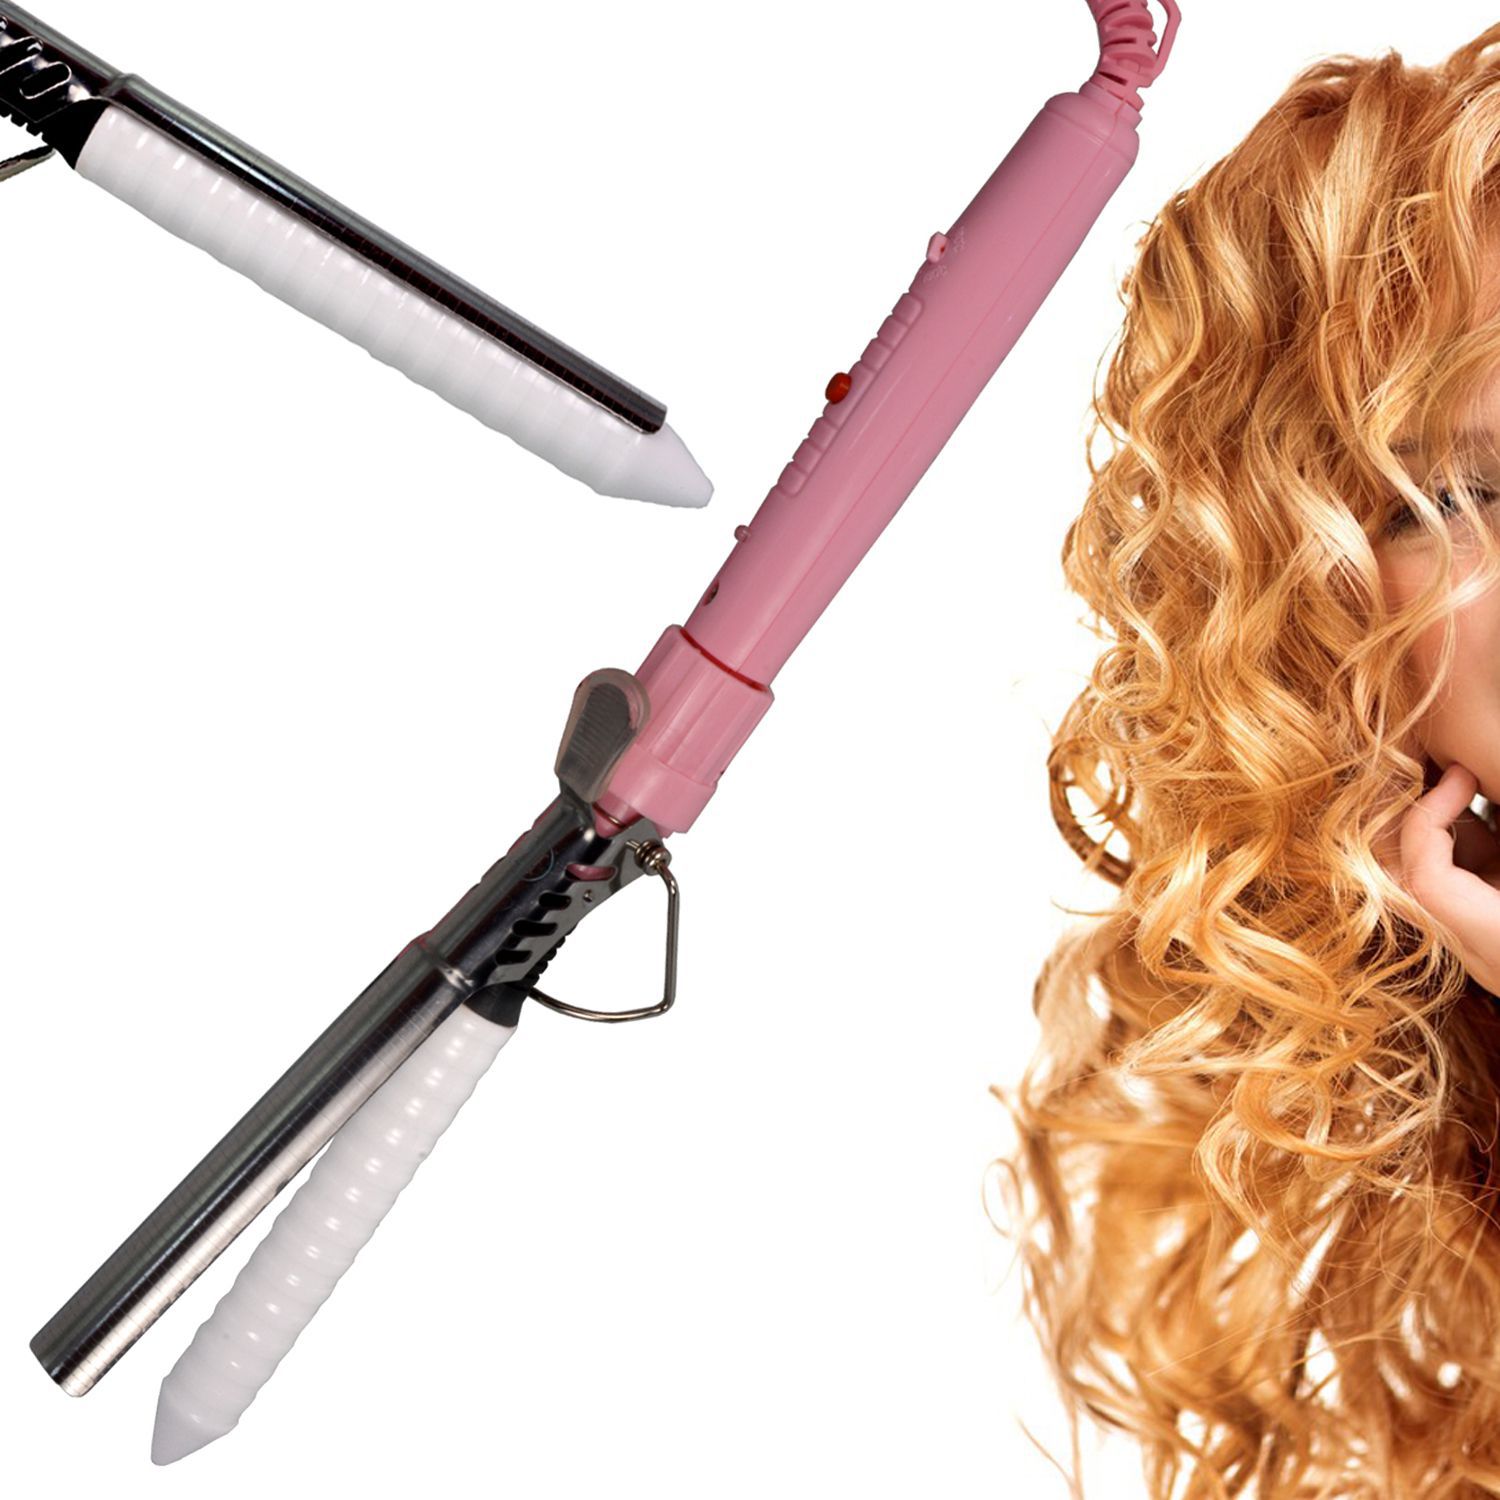 VG Ceramic Hair Curler C20 25mm Size Professional Hair Curling Iron EU  Plug Hair Heated Roller Buy Online at Best Prices in Bangladesh   Darazcombd